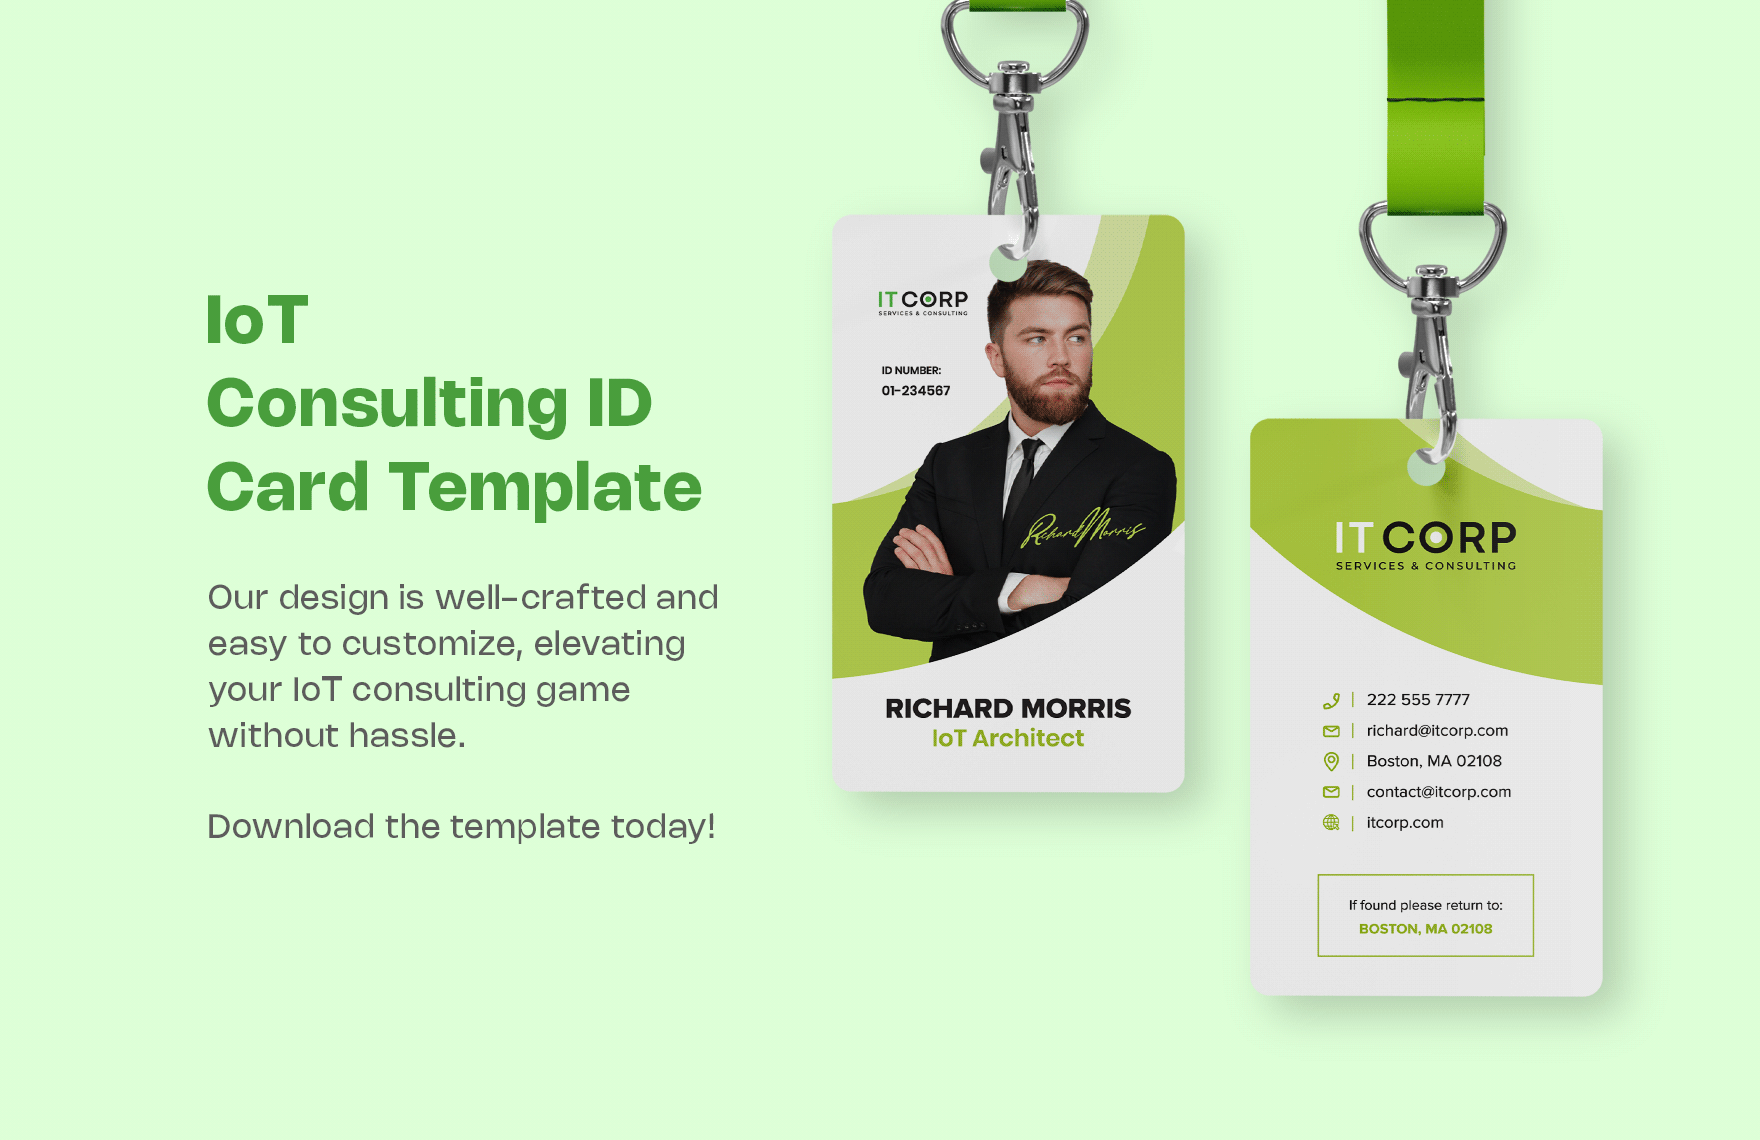 IoT Consulting ID Card Template in Word, Illustrator, PSD